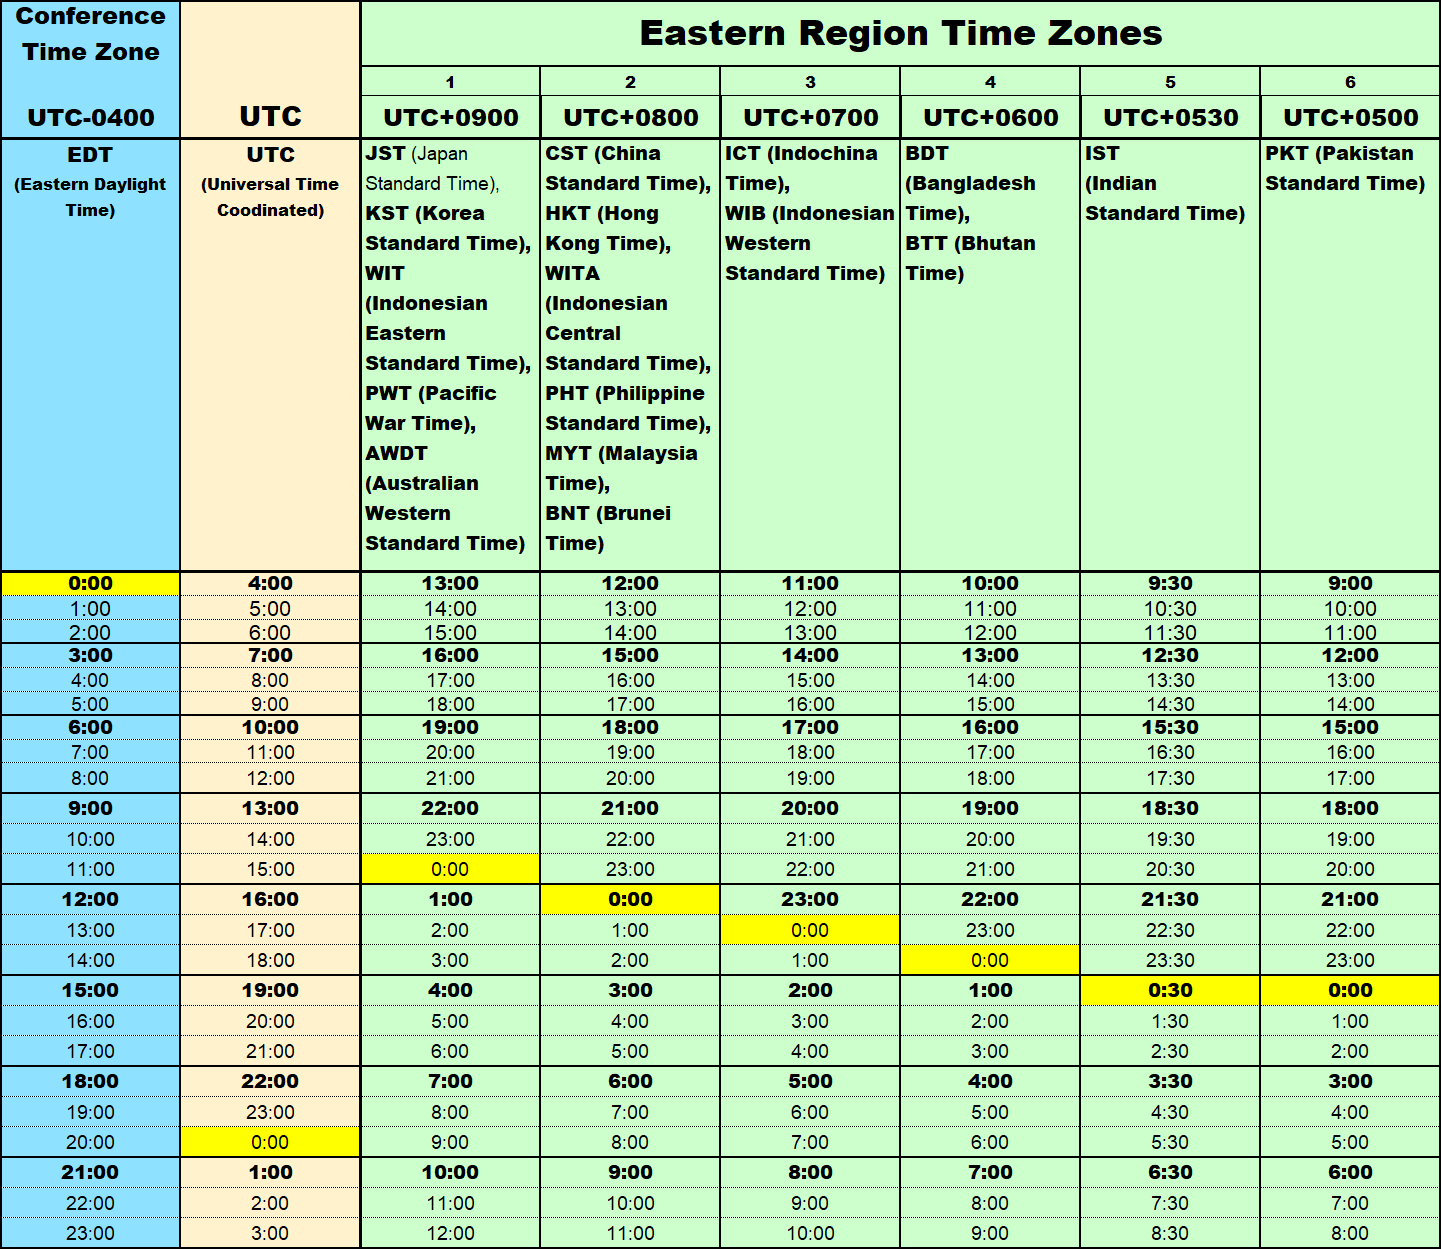 Conference Time Zones - Eastern Region